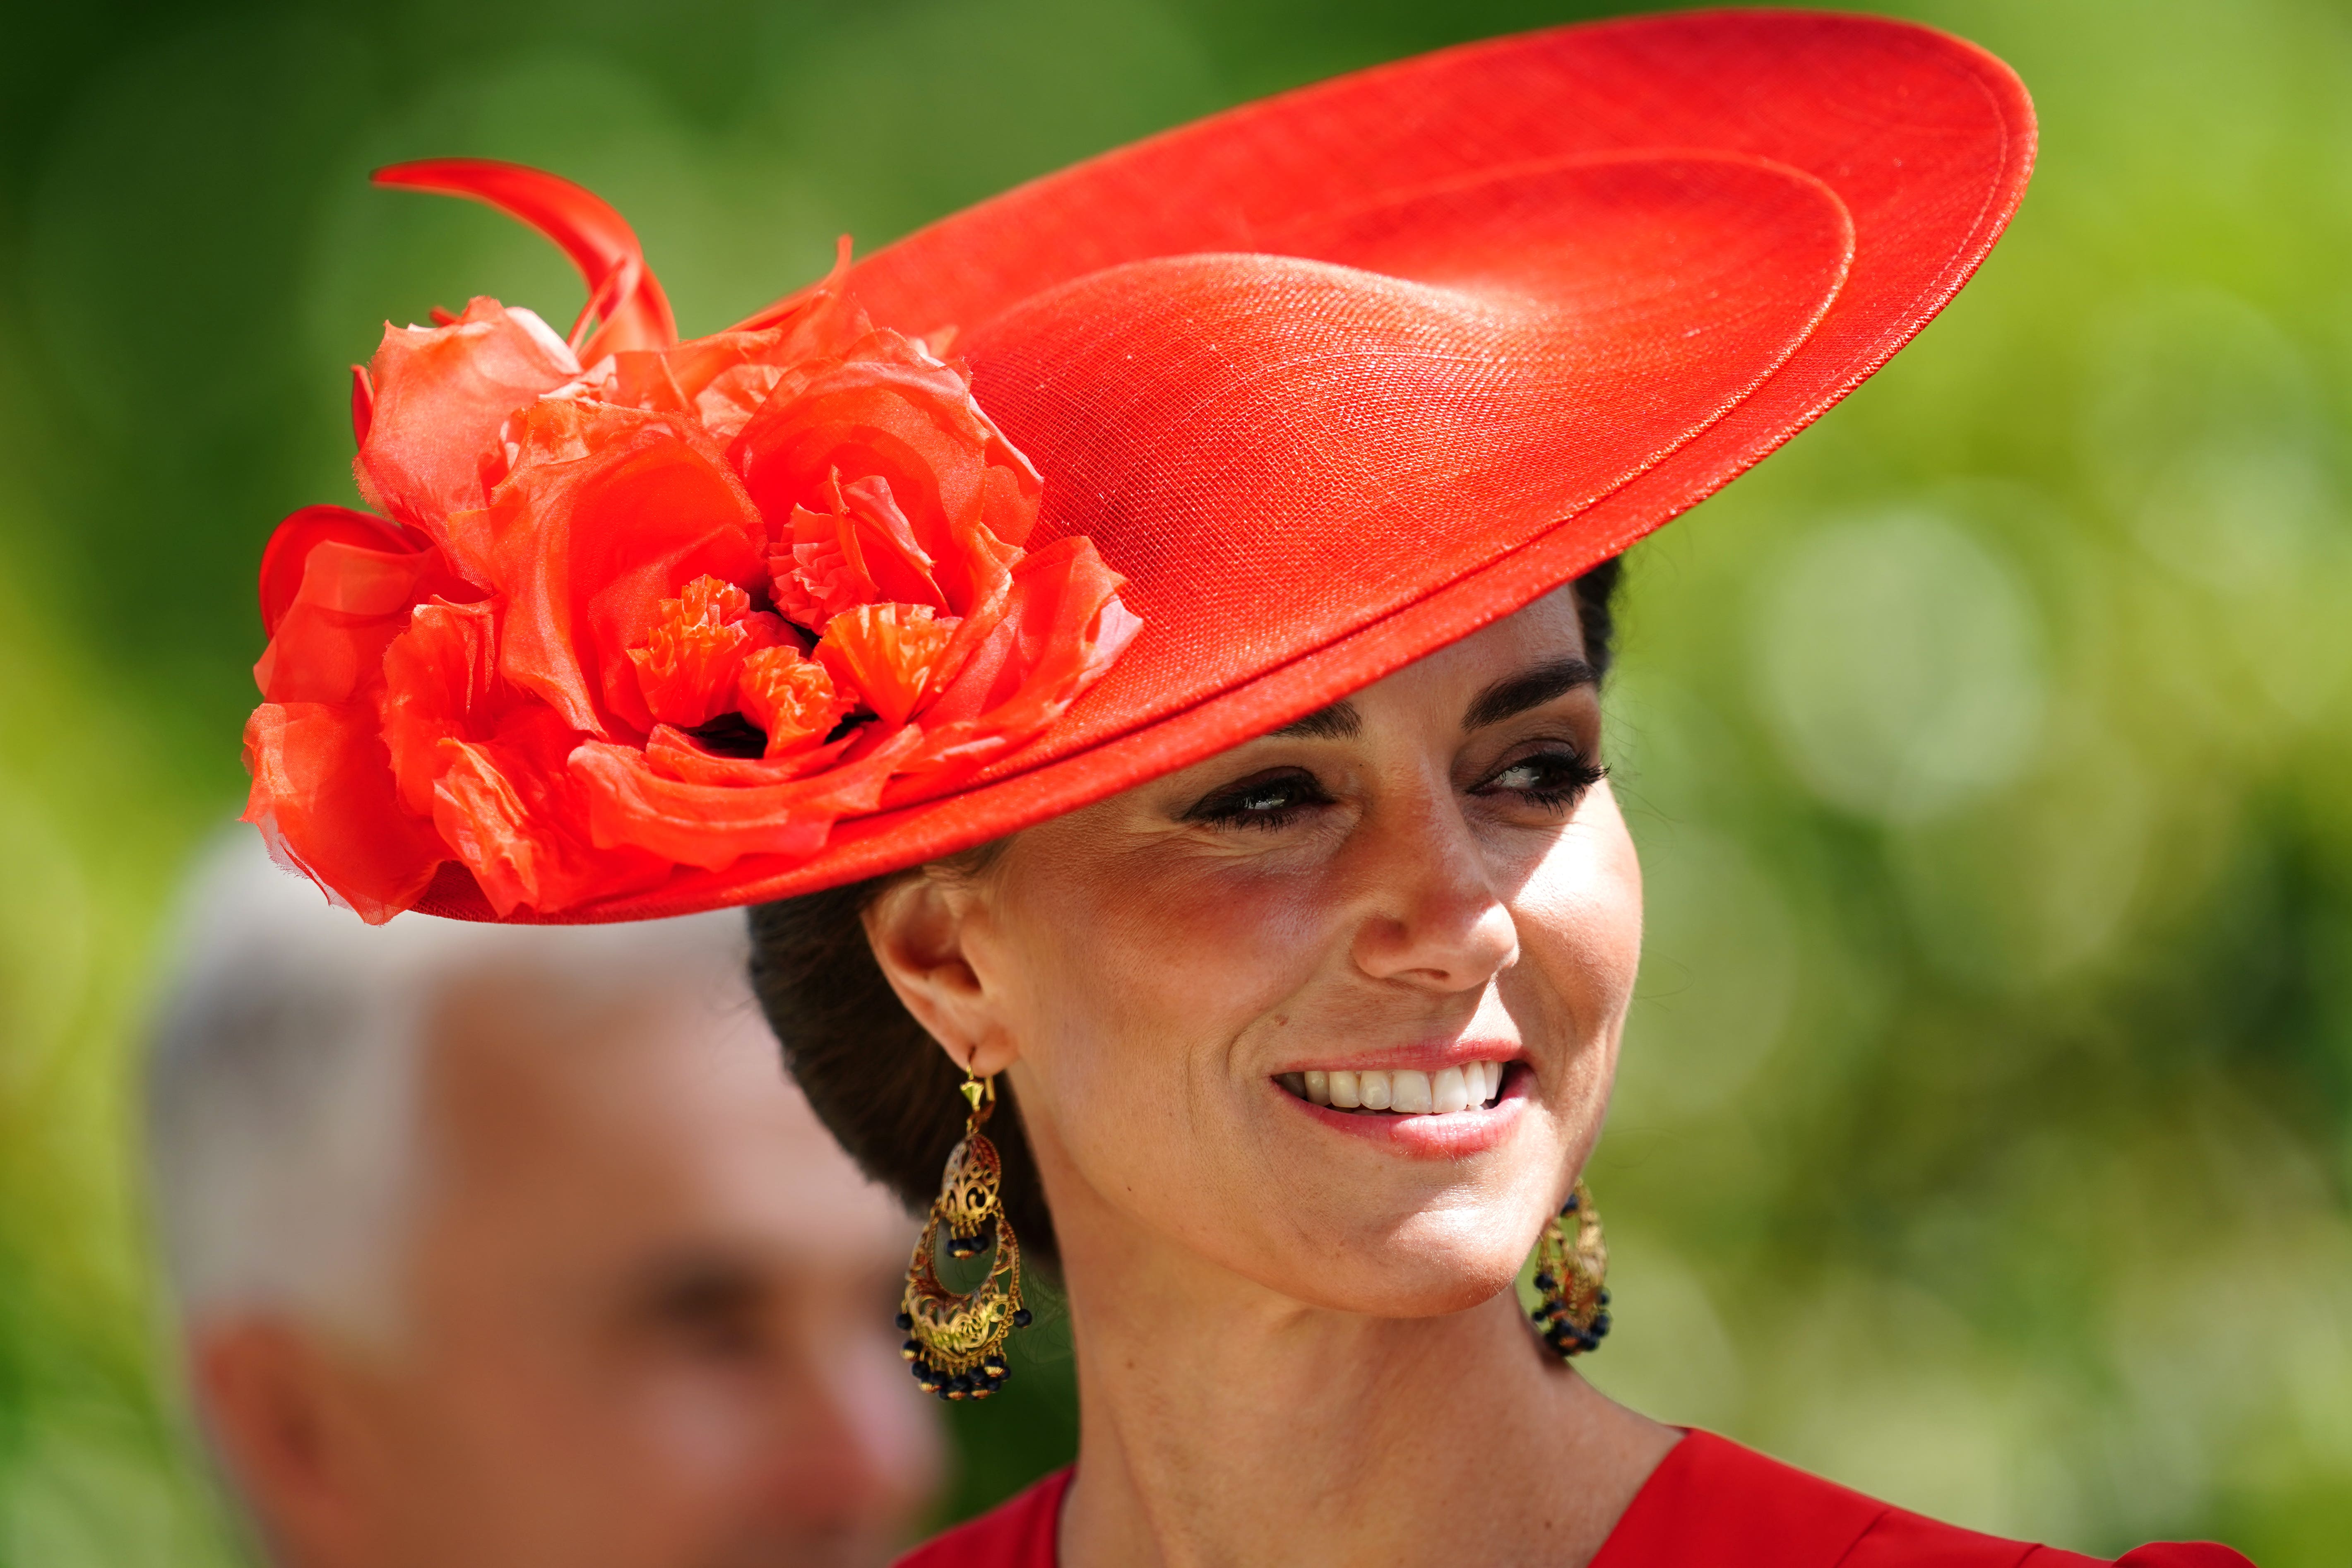 Princess of Wales appeared to celebrate a Royal Ascot winner at the races on Friday 23 June